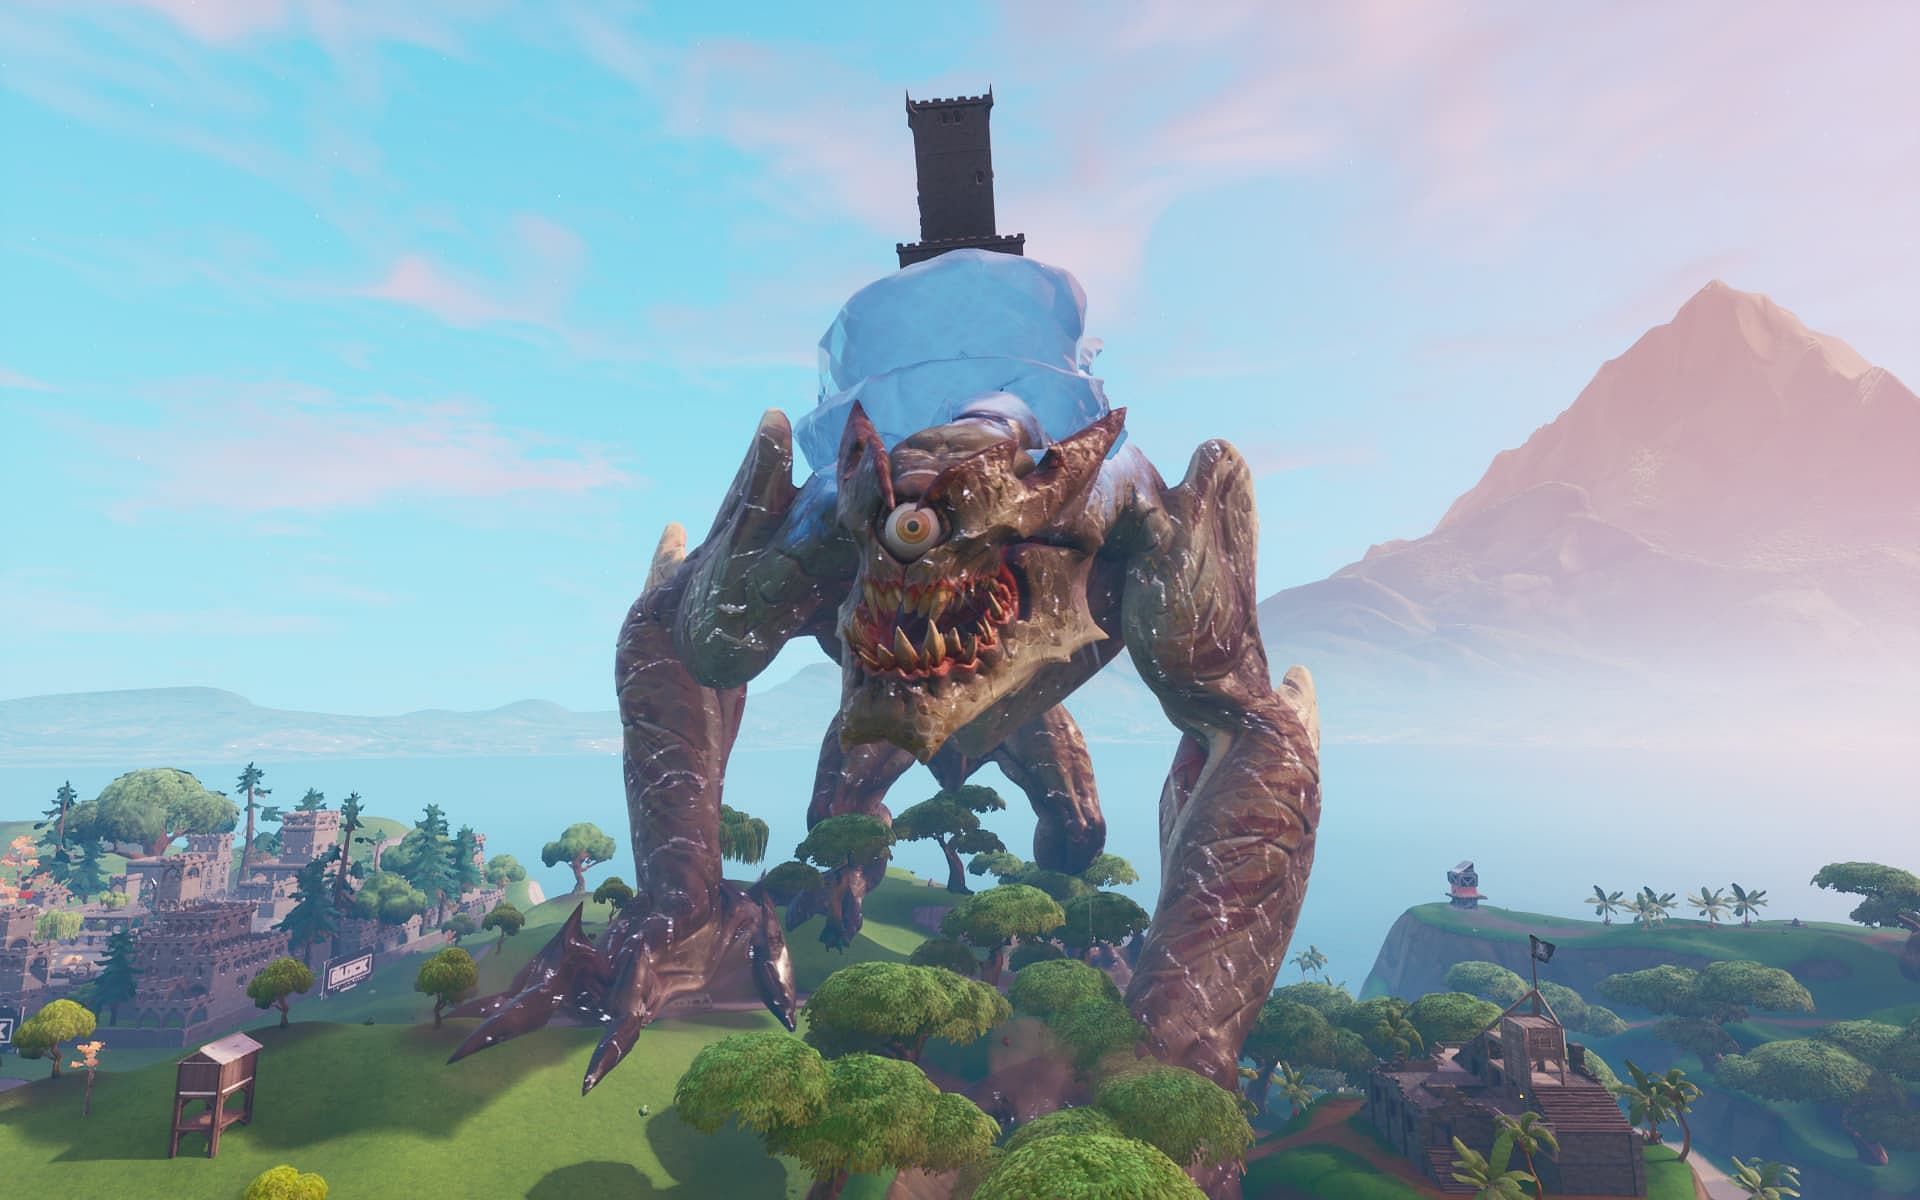 Fortnite Cattus Event: Leaked giant robot under construction at